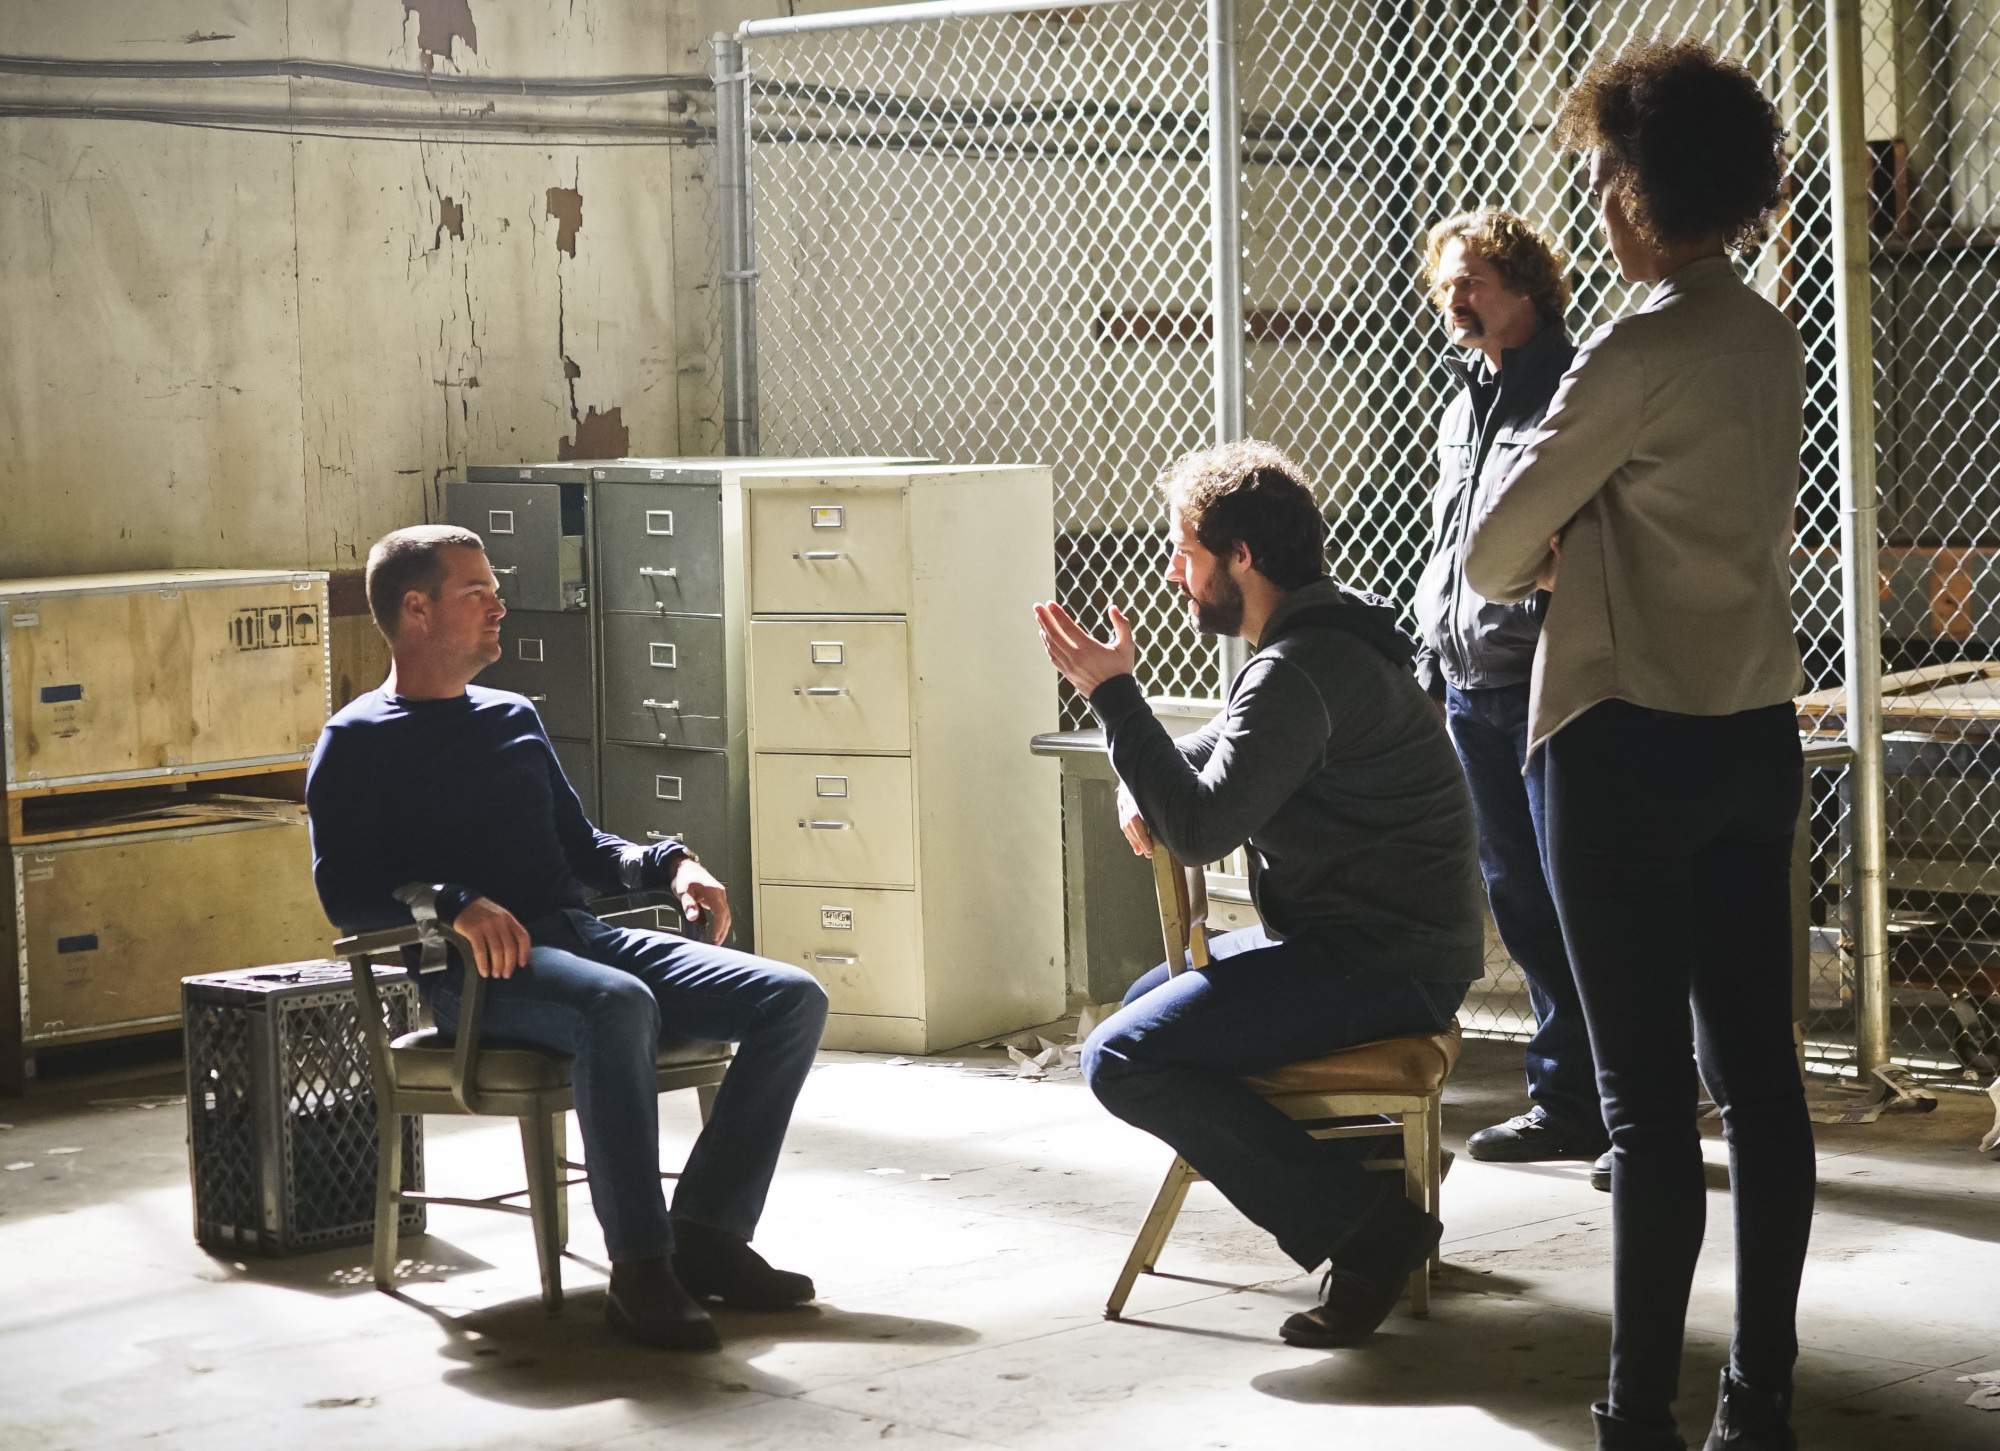 Chris O'Donnell as Special Agent G. Callen, Peter Cambor as Operational Psychologist Nate Getz, and Judith Shekoni as Alisa Chambers